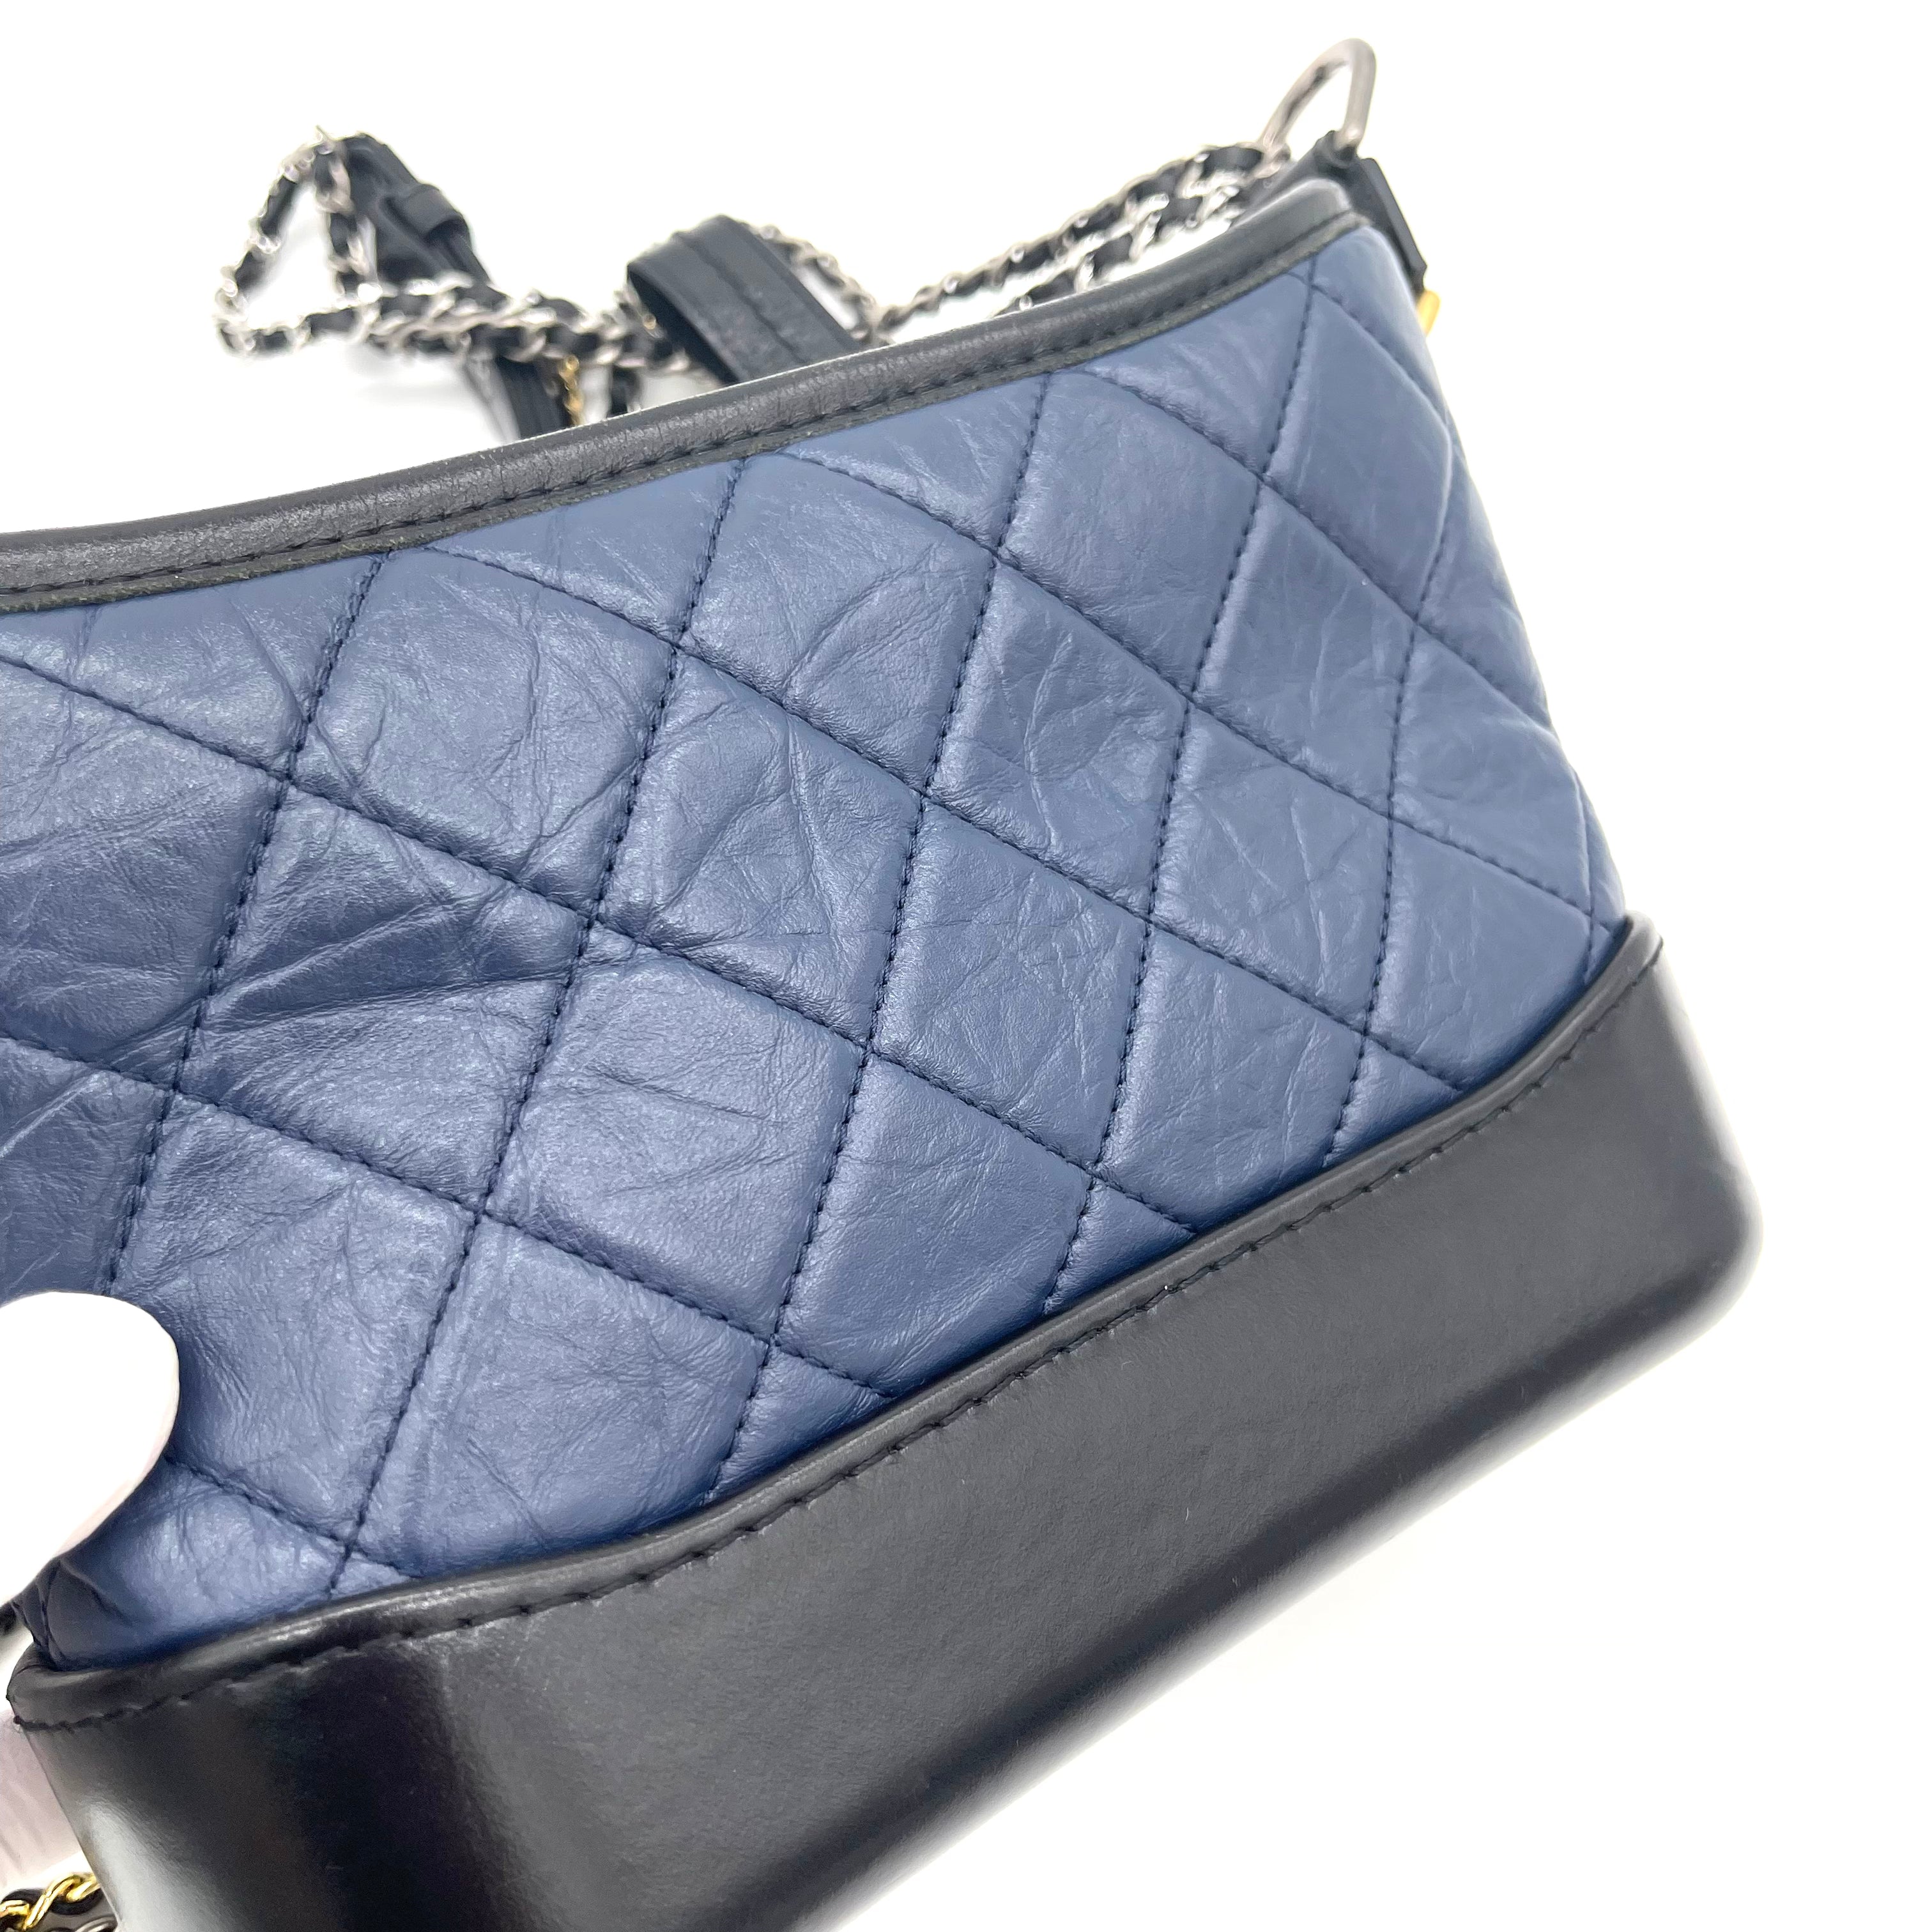 Chanel Aged Calfskin Quilted Small Gabrielle Hobo Navy Black